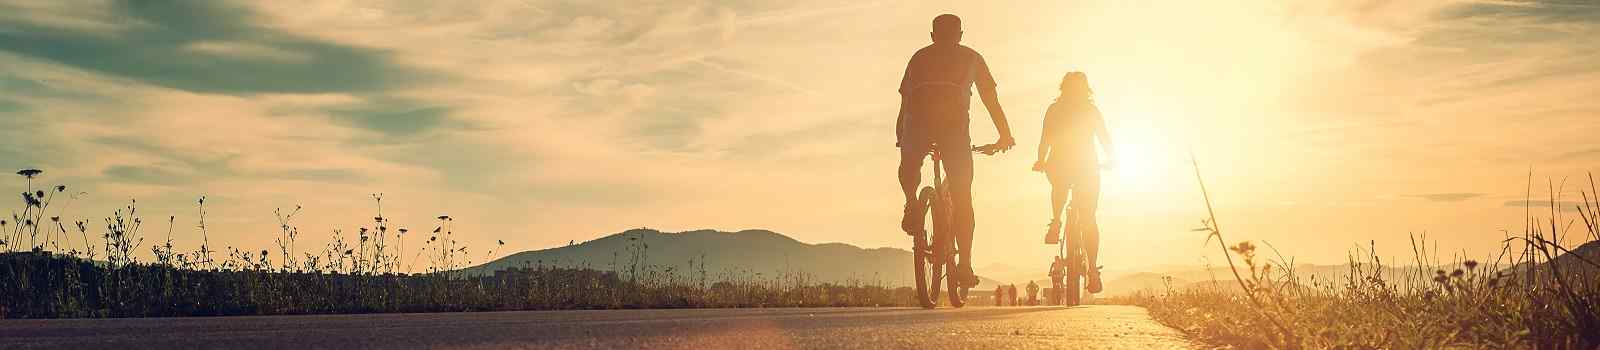 FUGGER-AUG-INNS  Cyclists are on the sunset road  shutterstock 498444379